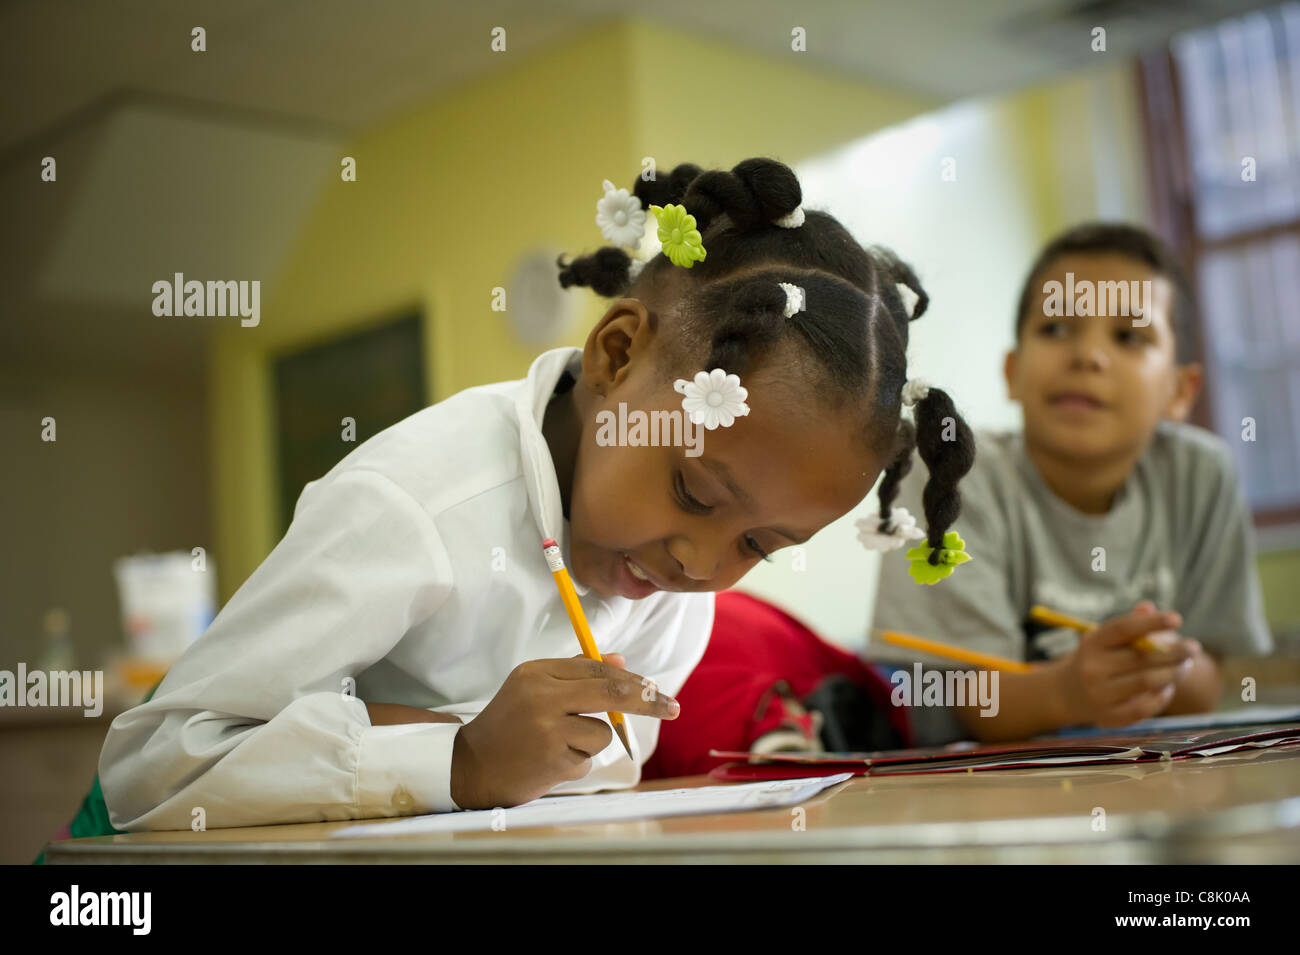 second-and-third-graders-do-homework-during-an-after-school-program-in